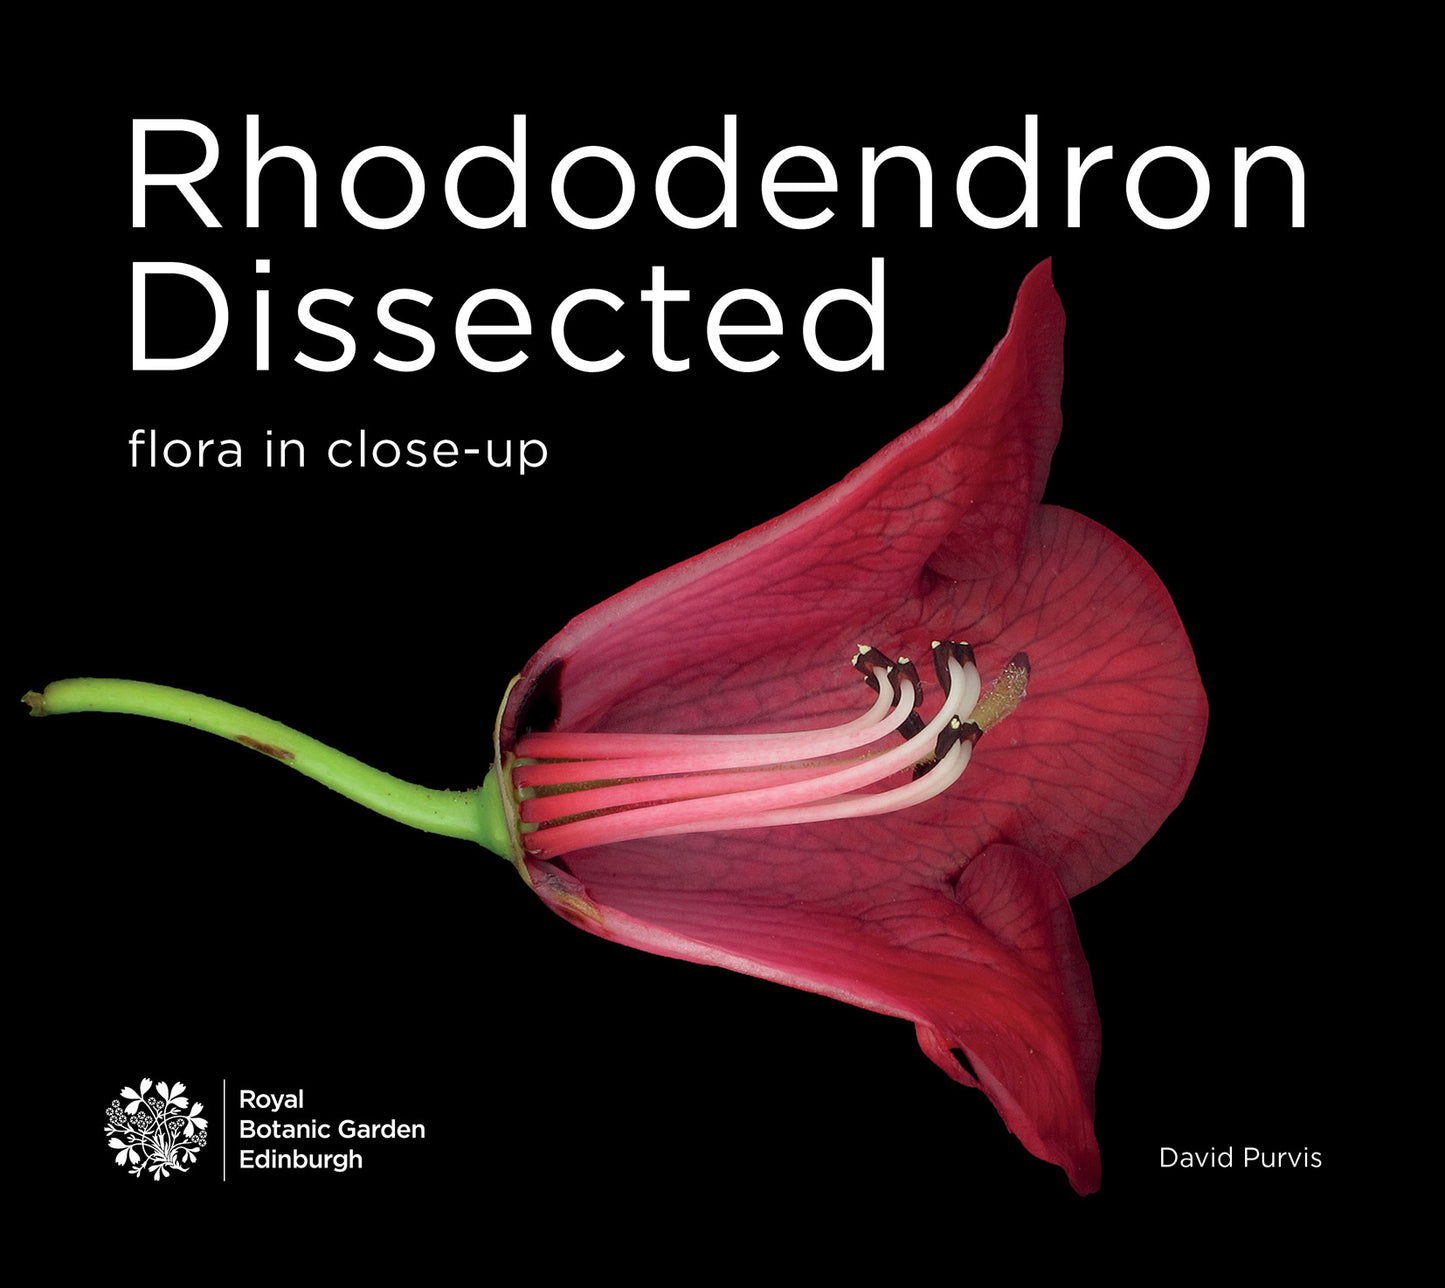 Rhododendron Dissected-Flora in close-up